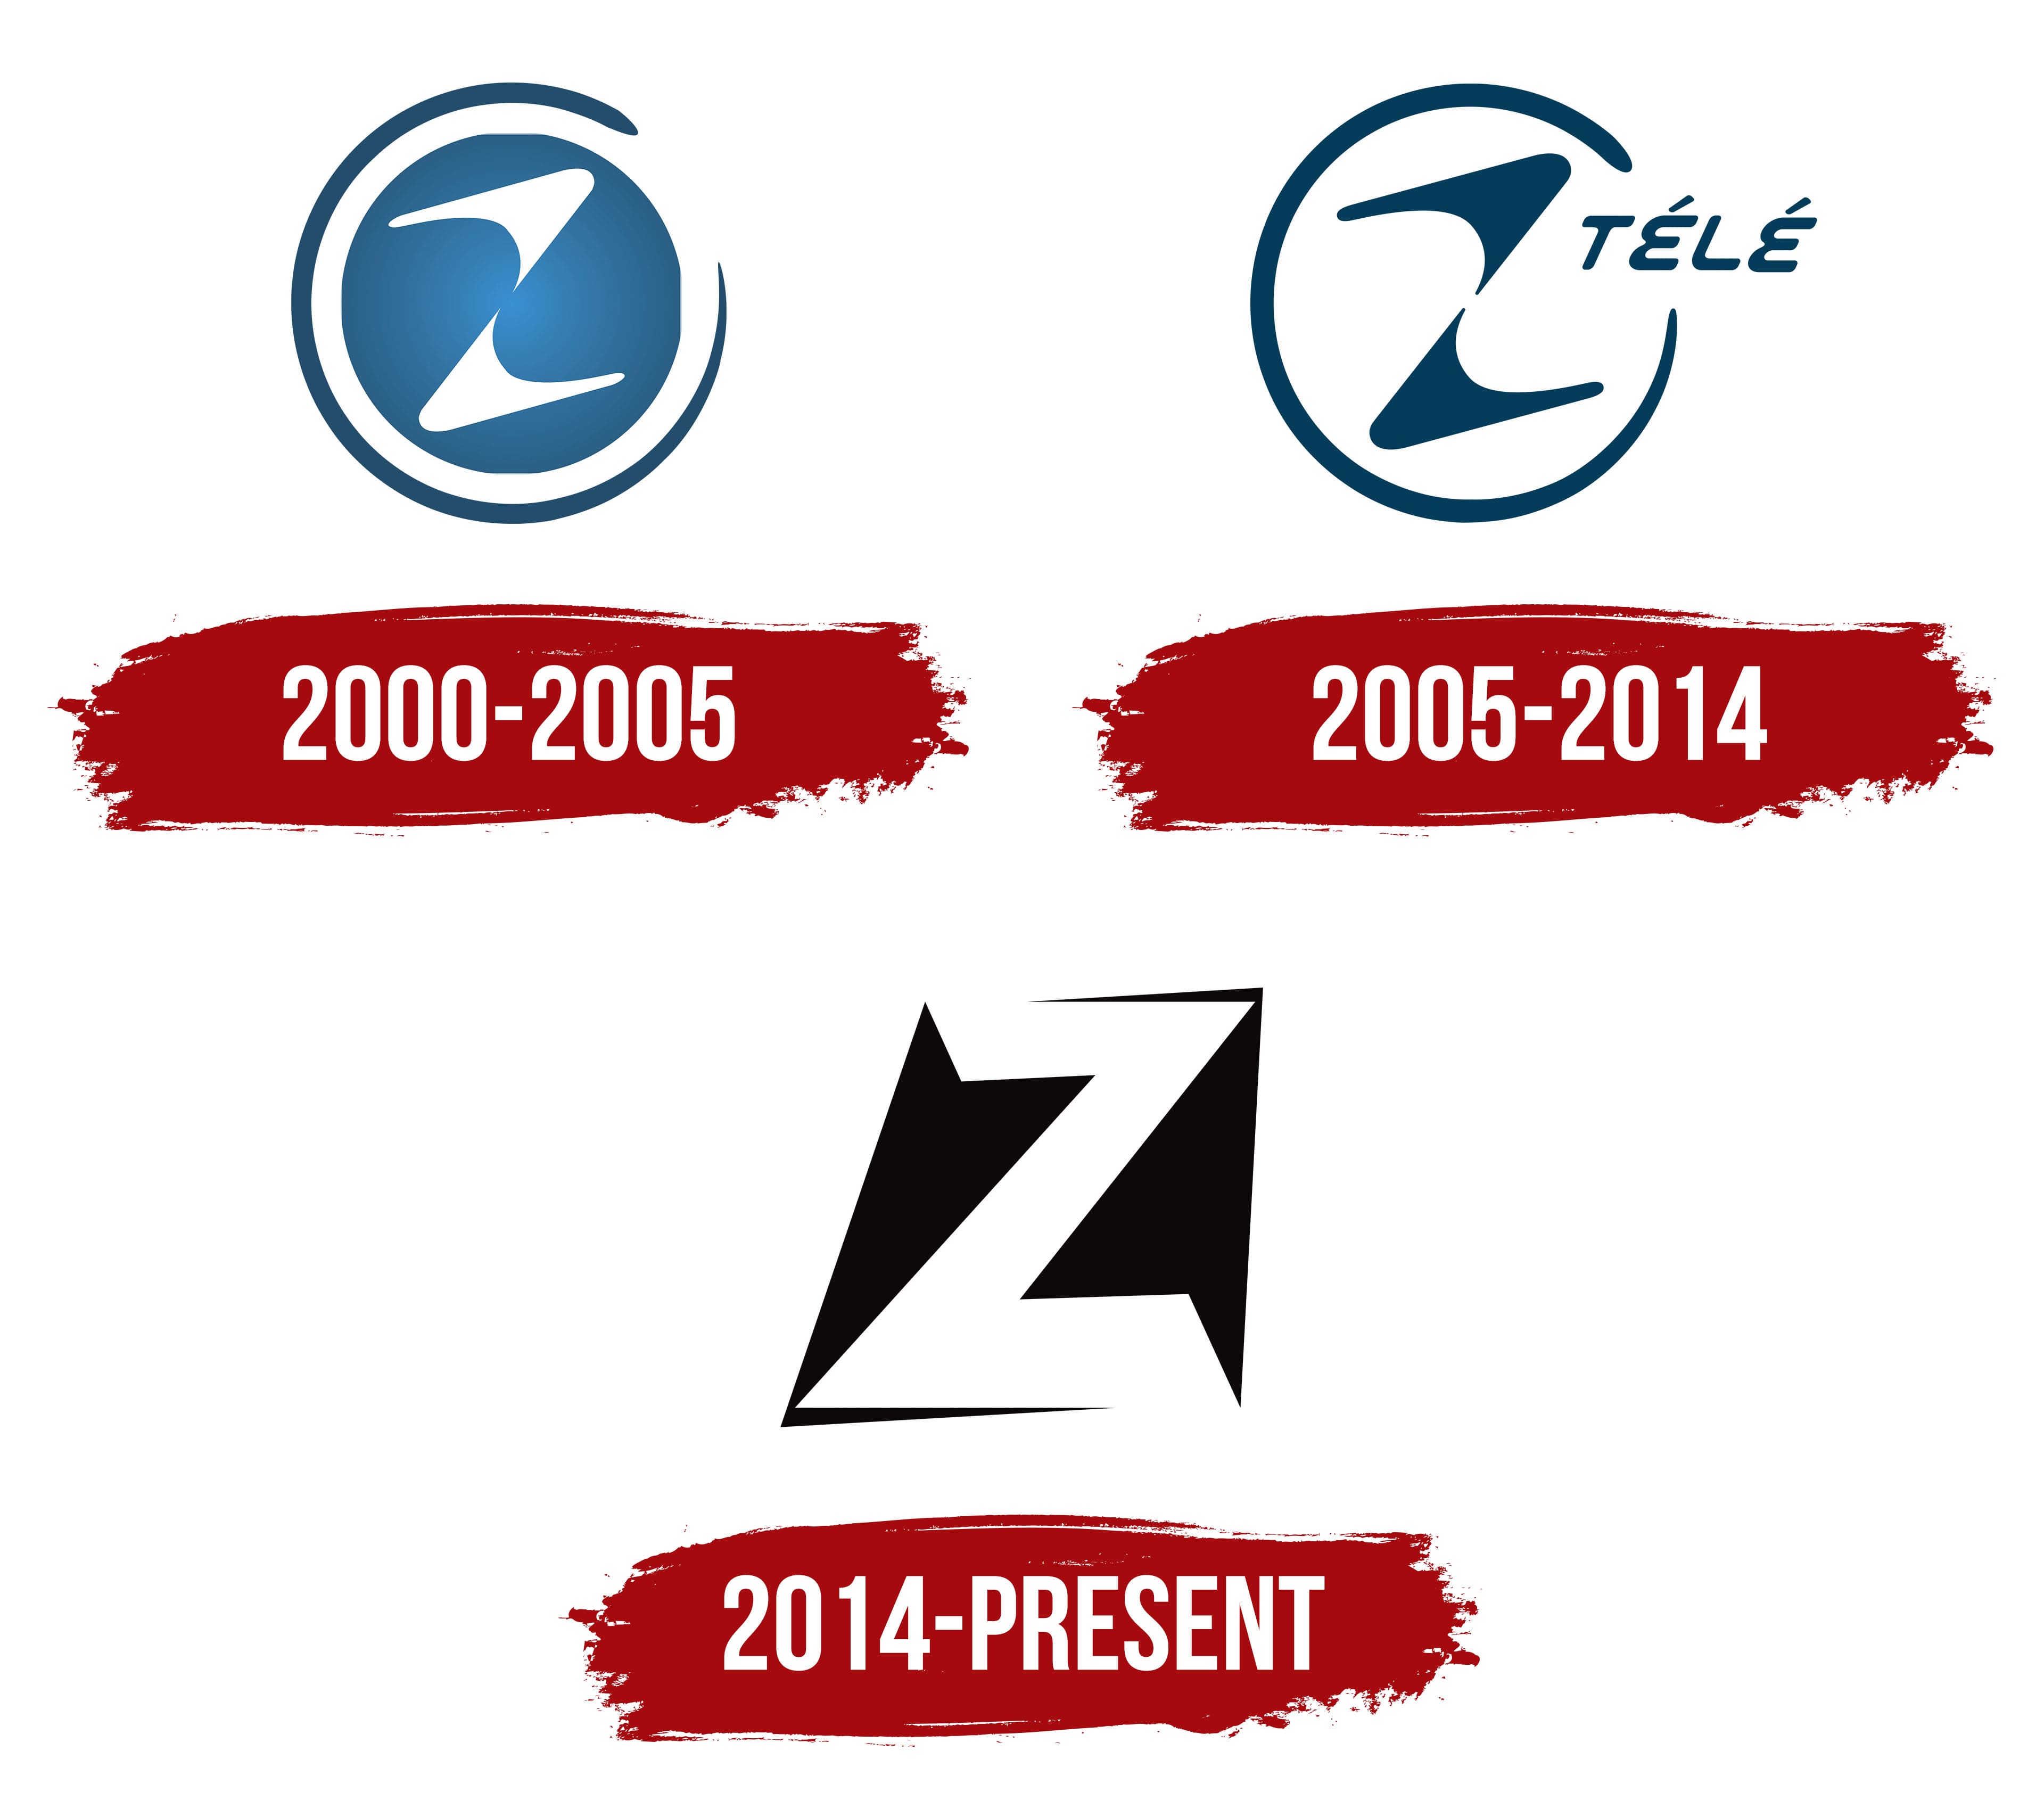 Letter Zs Logo designs, themes, templates and downloadable graphic elements  on Dribbble